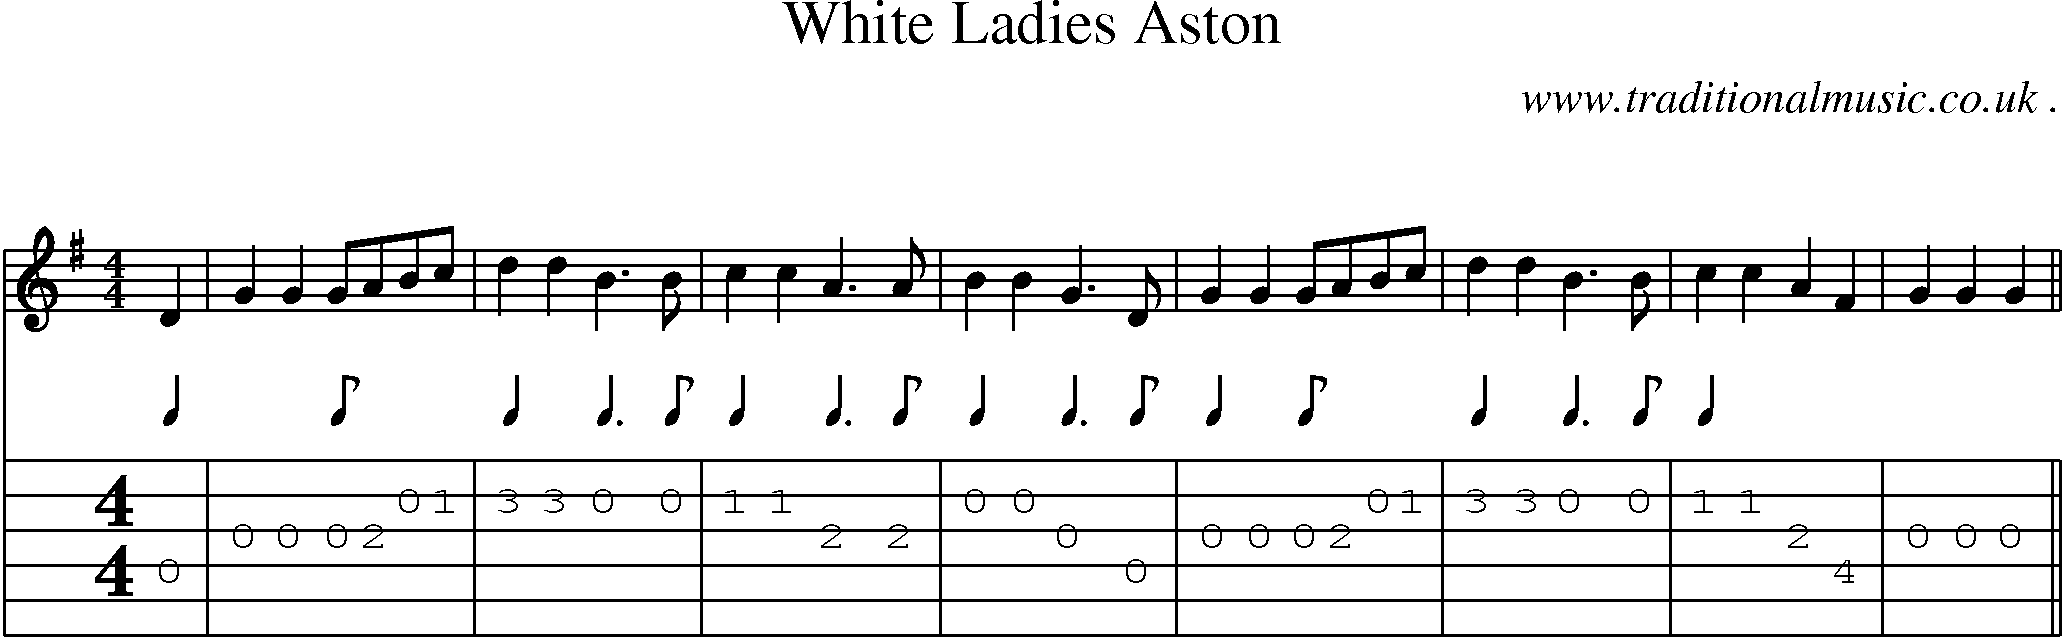 Sheet-Music and Guitar Tabs for White Ladies Aston